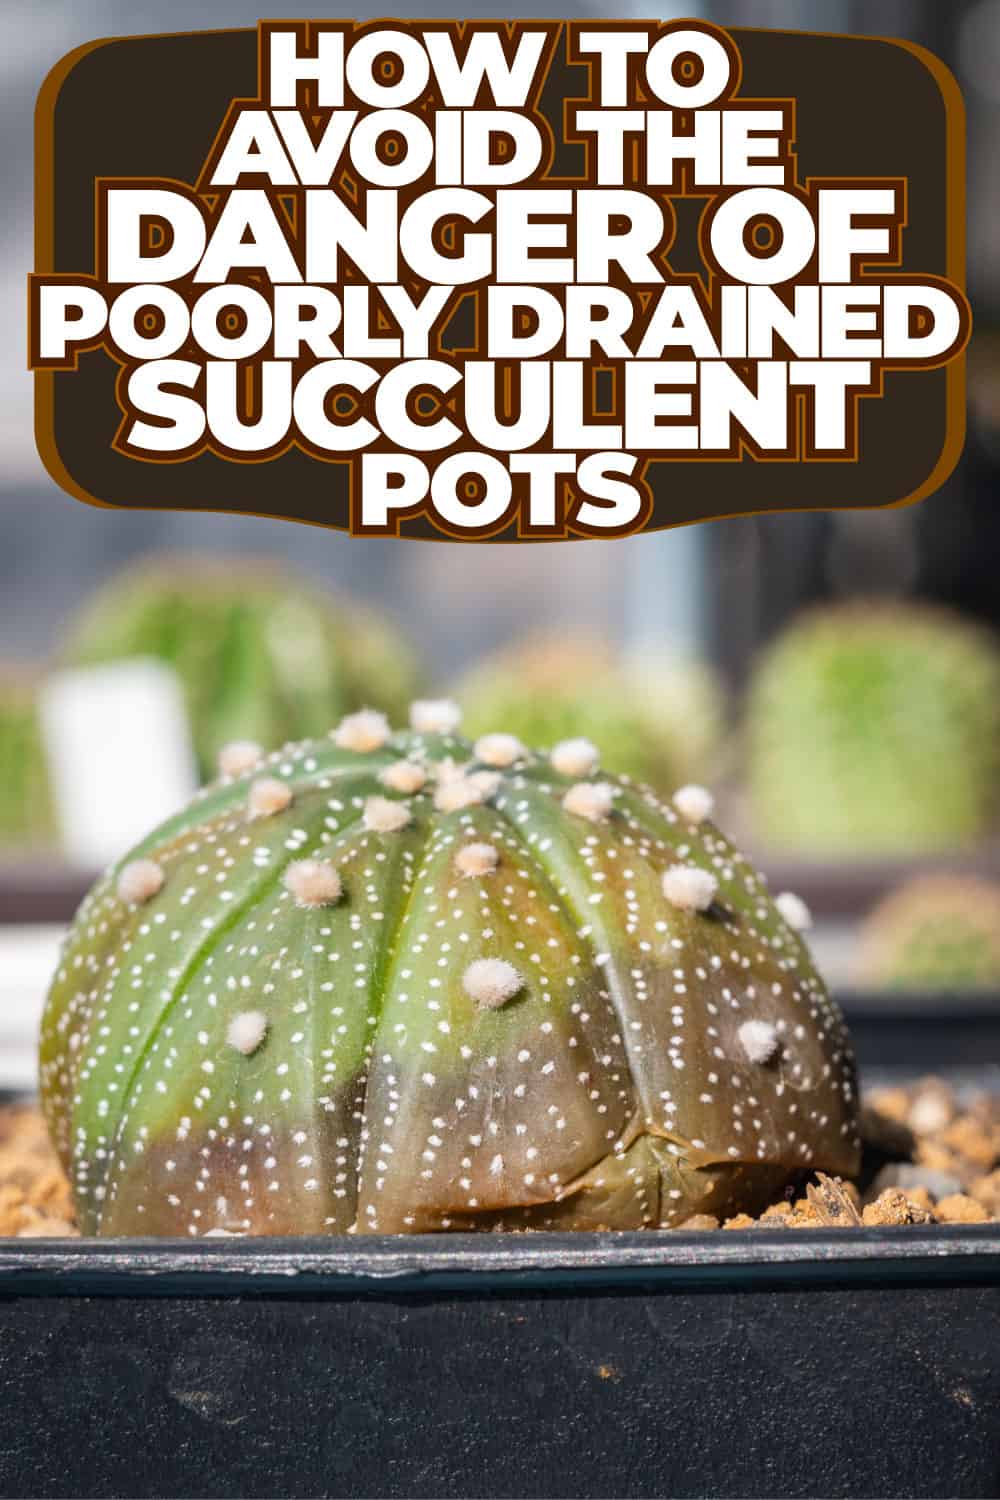 How to Avoid the Danger of Poorly Drained Succulent Pots